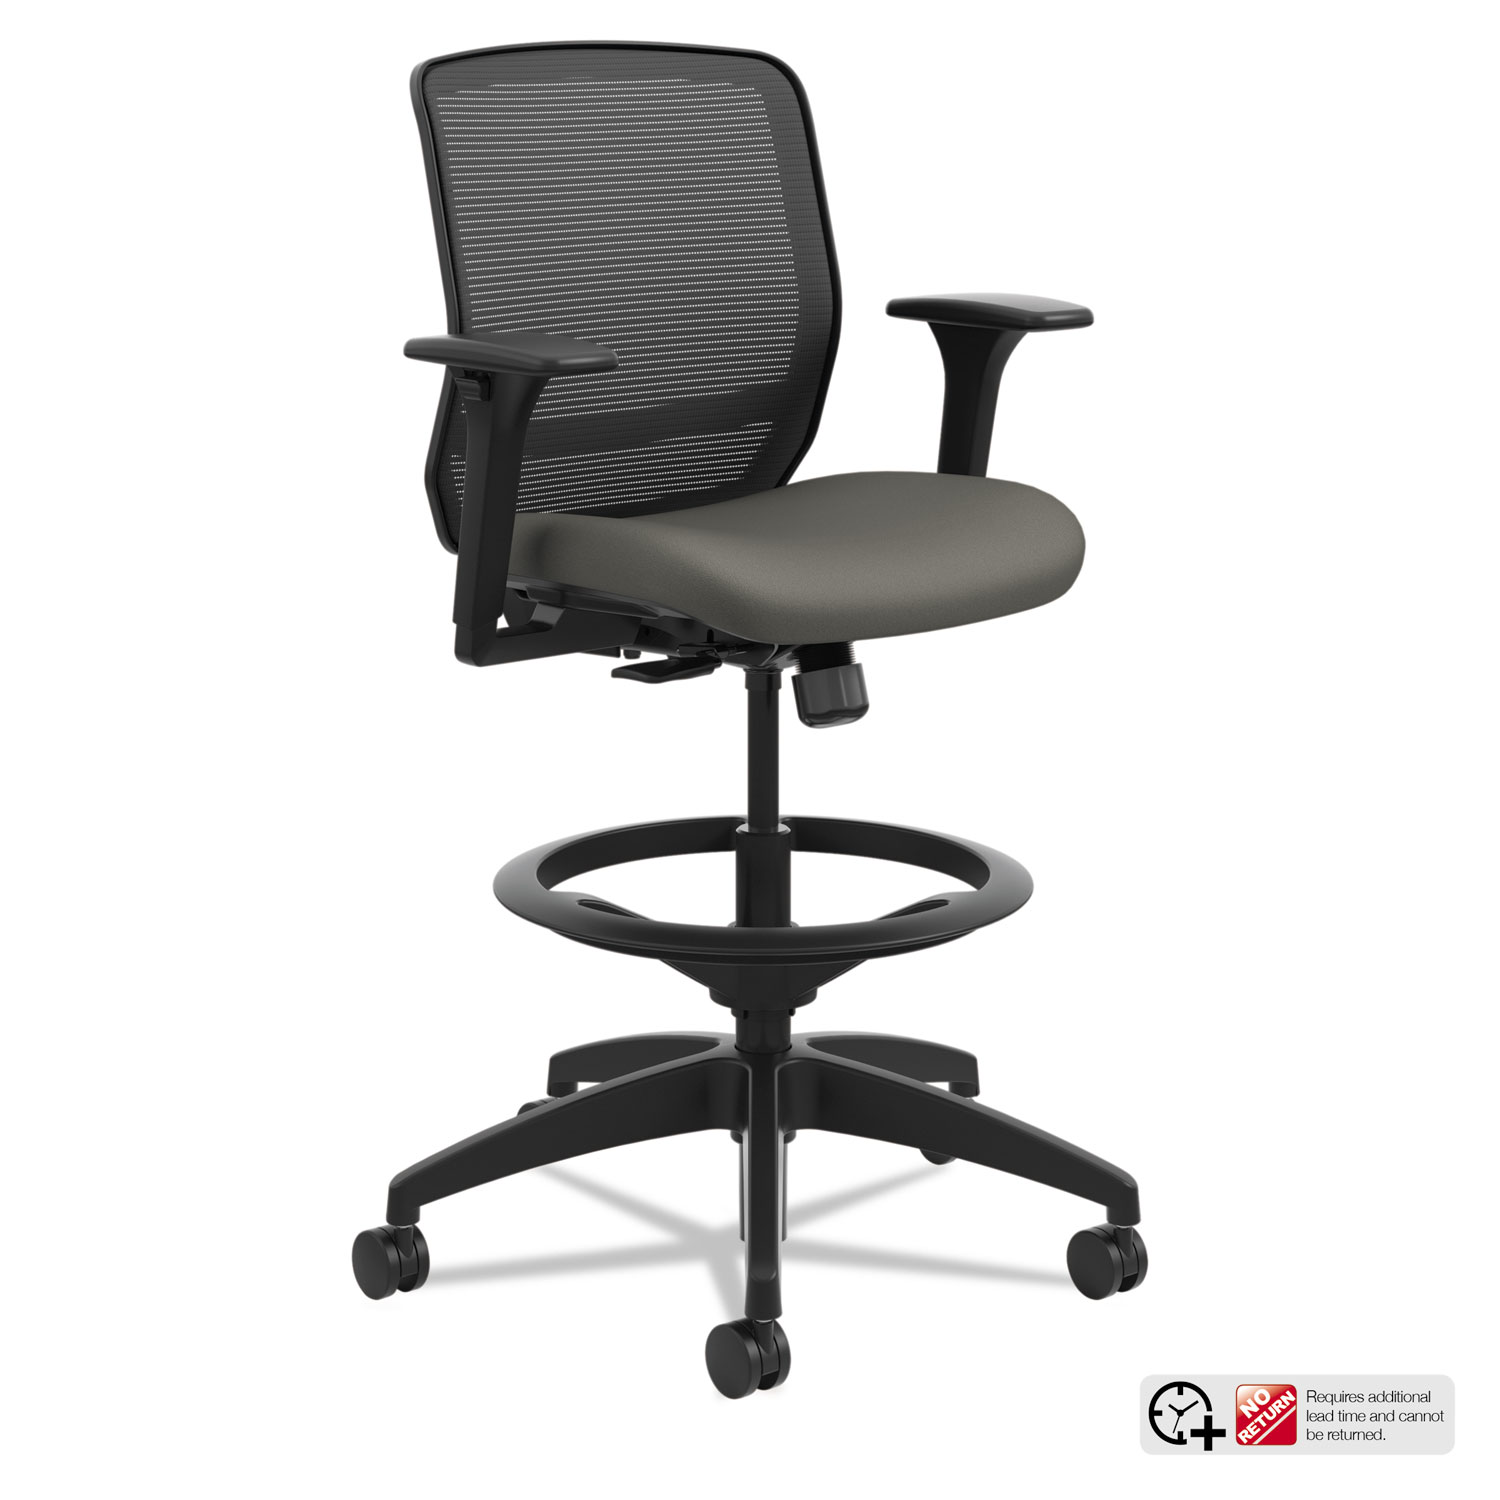  HON HQTSM.Y0.A.H.IM.CU19.SB Quotient Series Mesh Mid-Back Task Stool, 33 Seat Height, Supports up to 300 lbs., Iron Ore Seat/Black Back, Black Base (HONQTSMY1ACU19) 